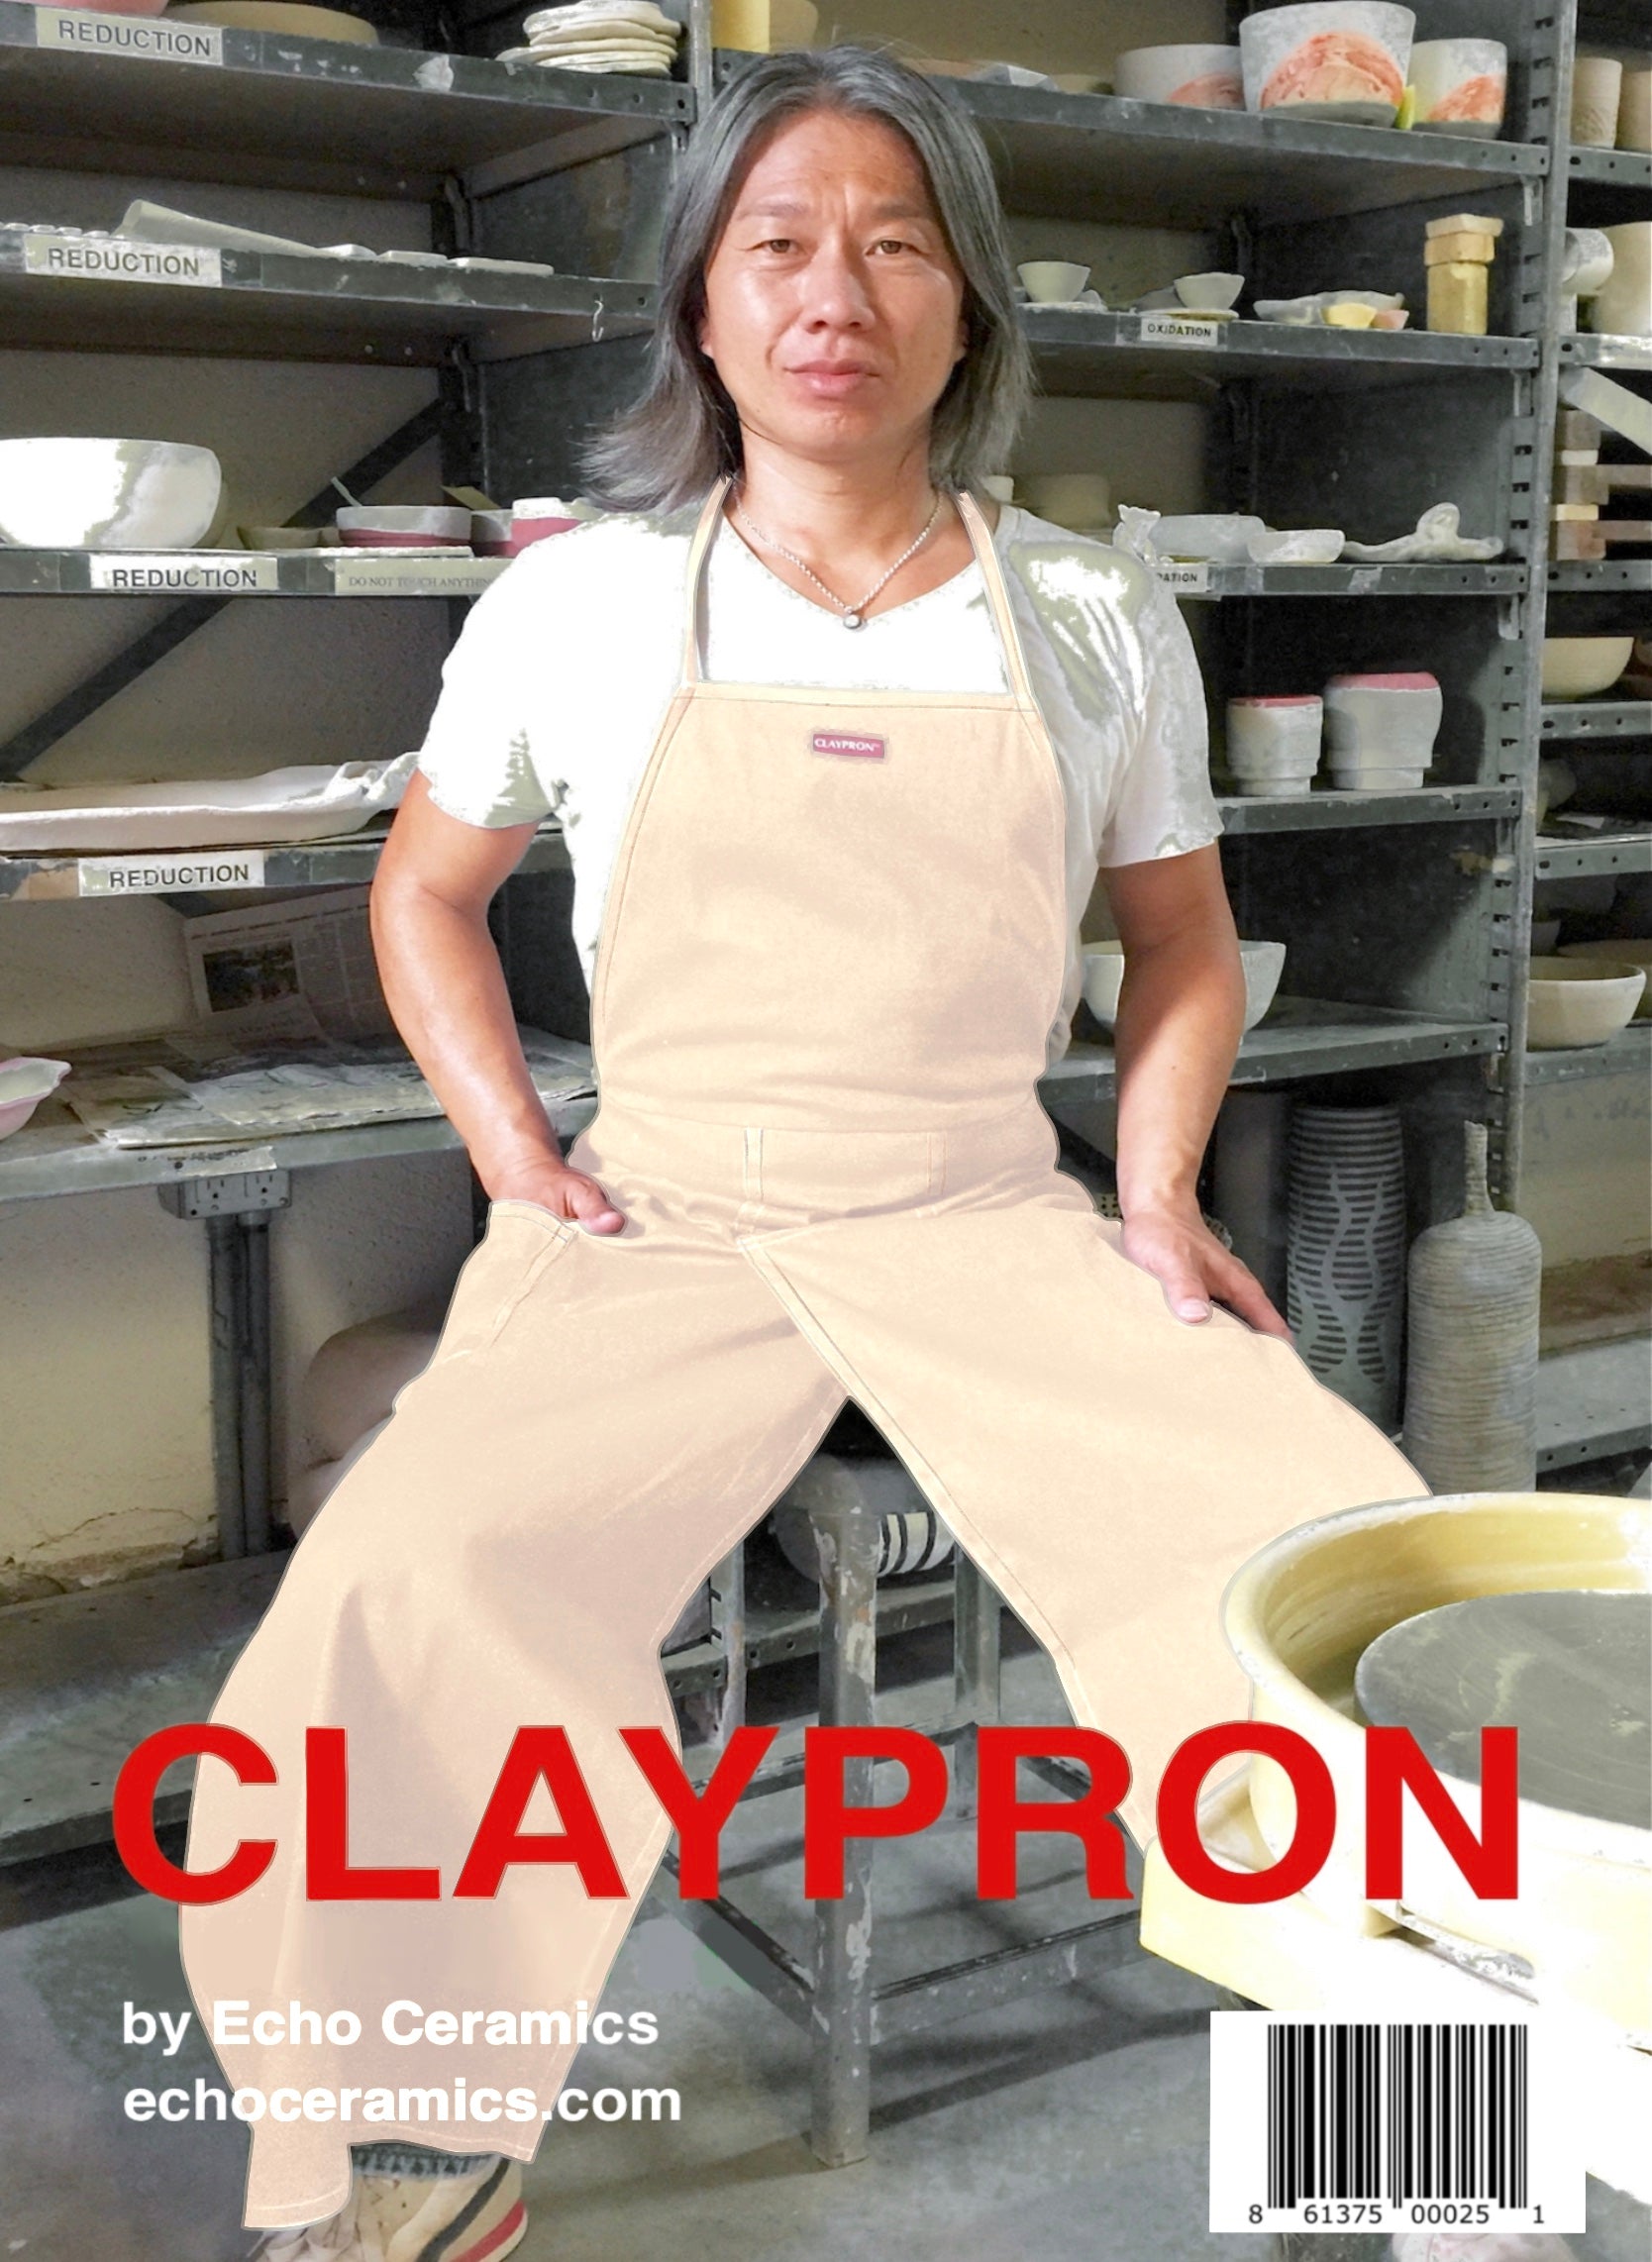 Claypron for ceramic artists, potters, fine artists and chefs